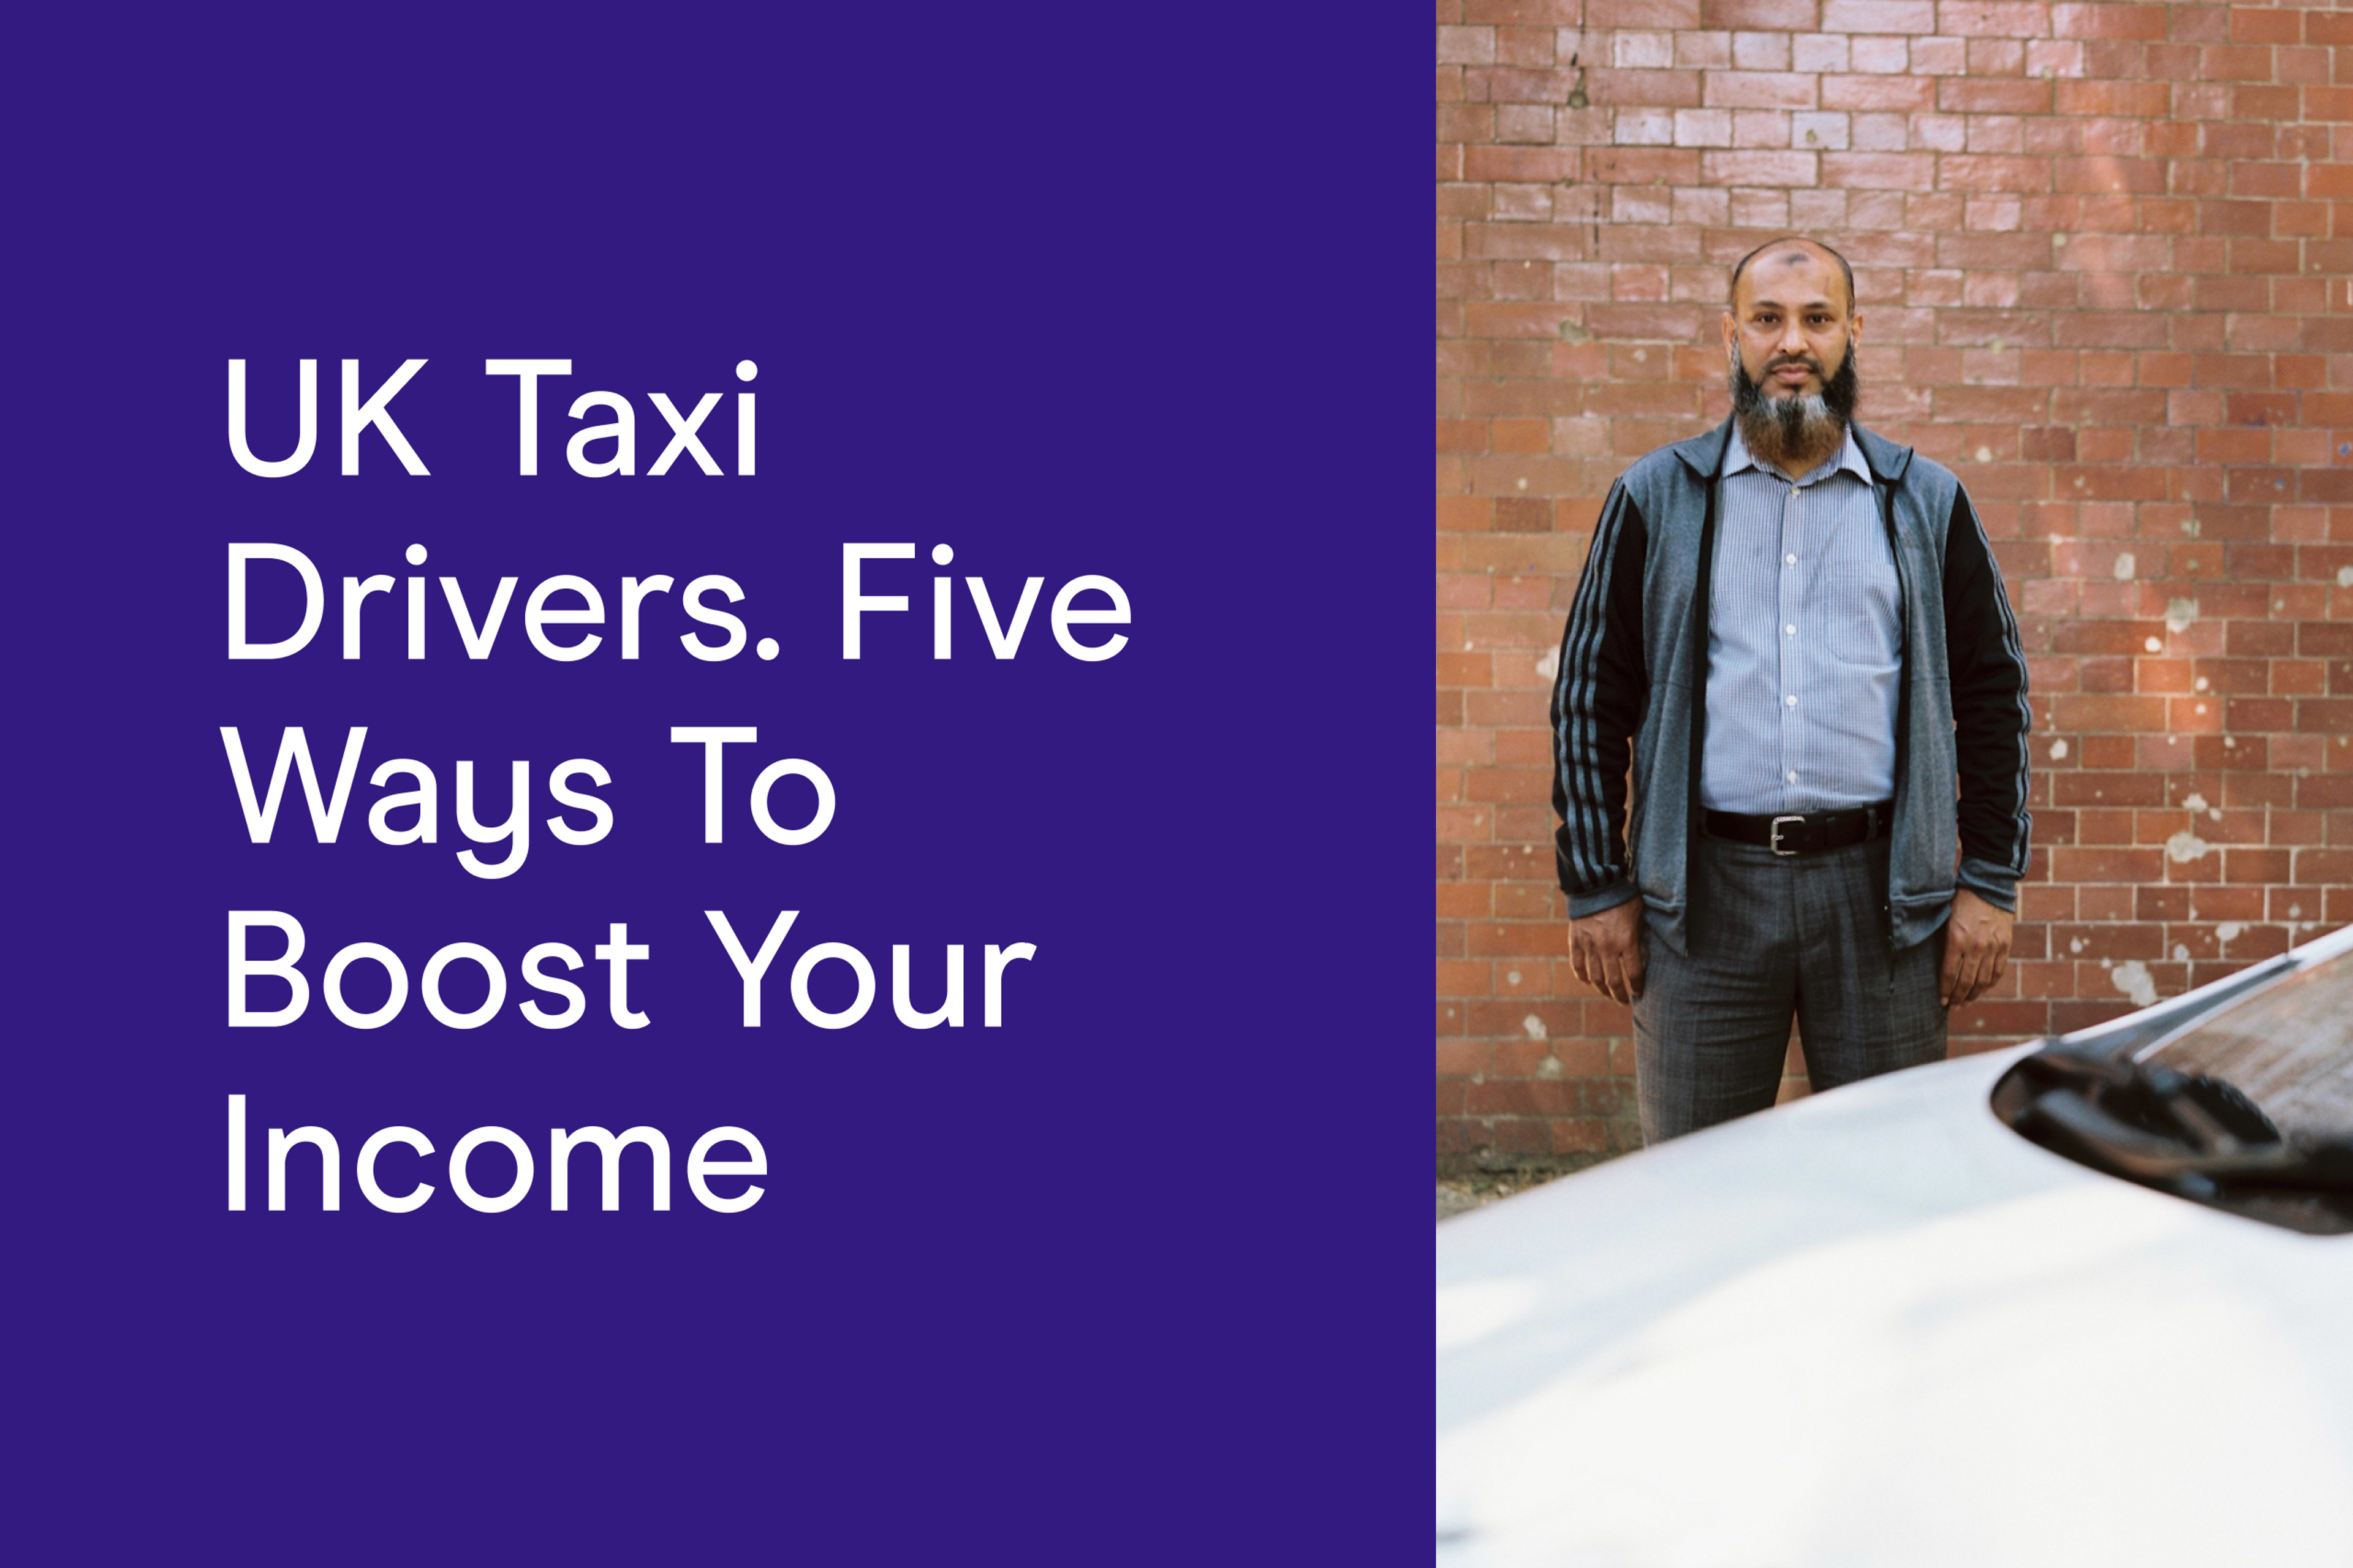 UK Taxi Drivers. Five Ways to Boost Your Income